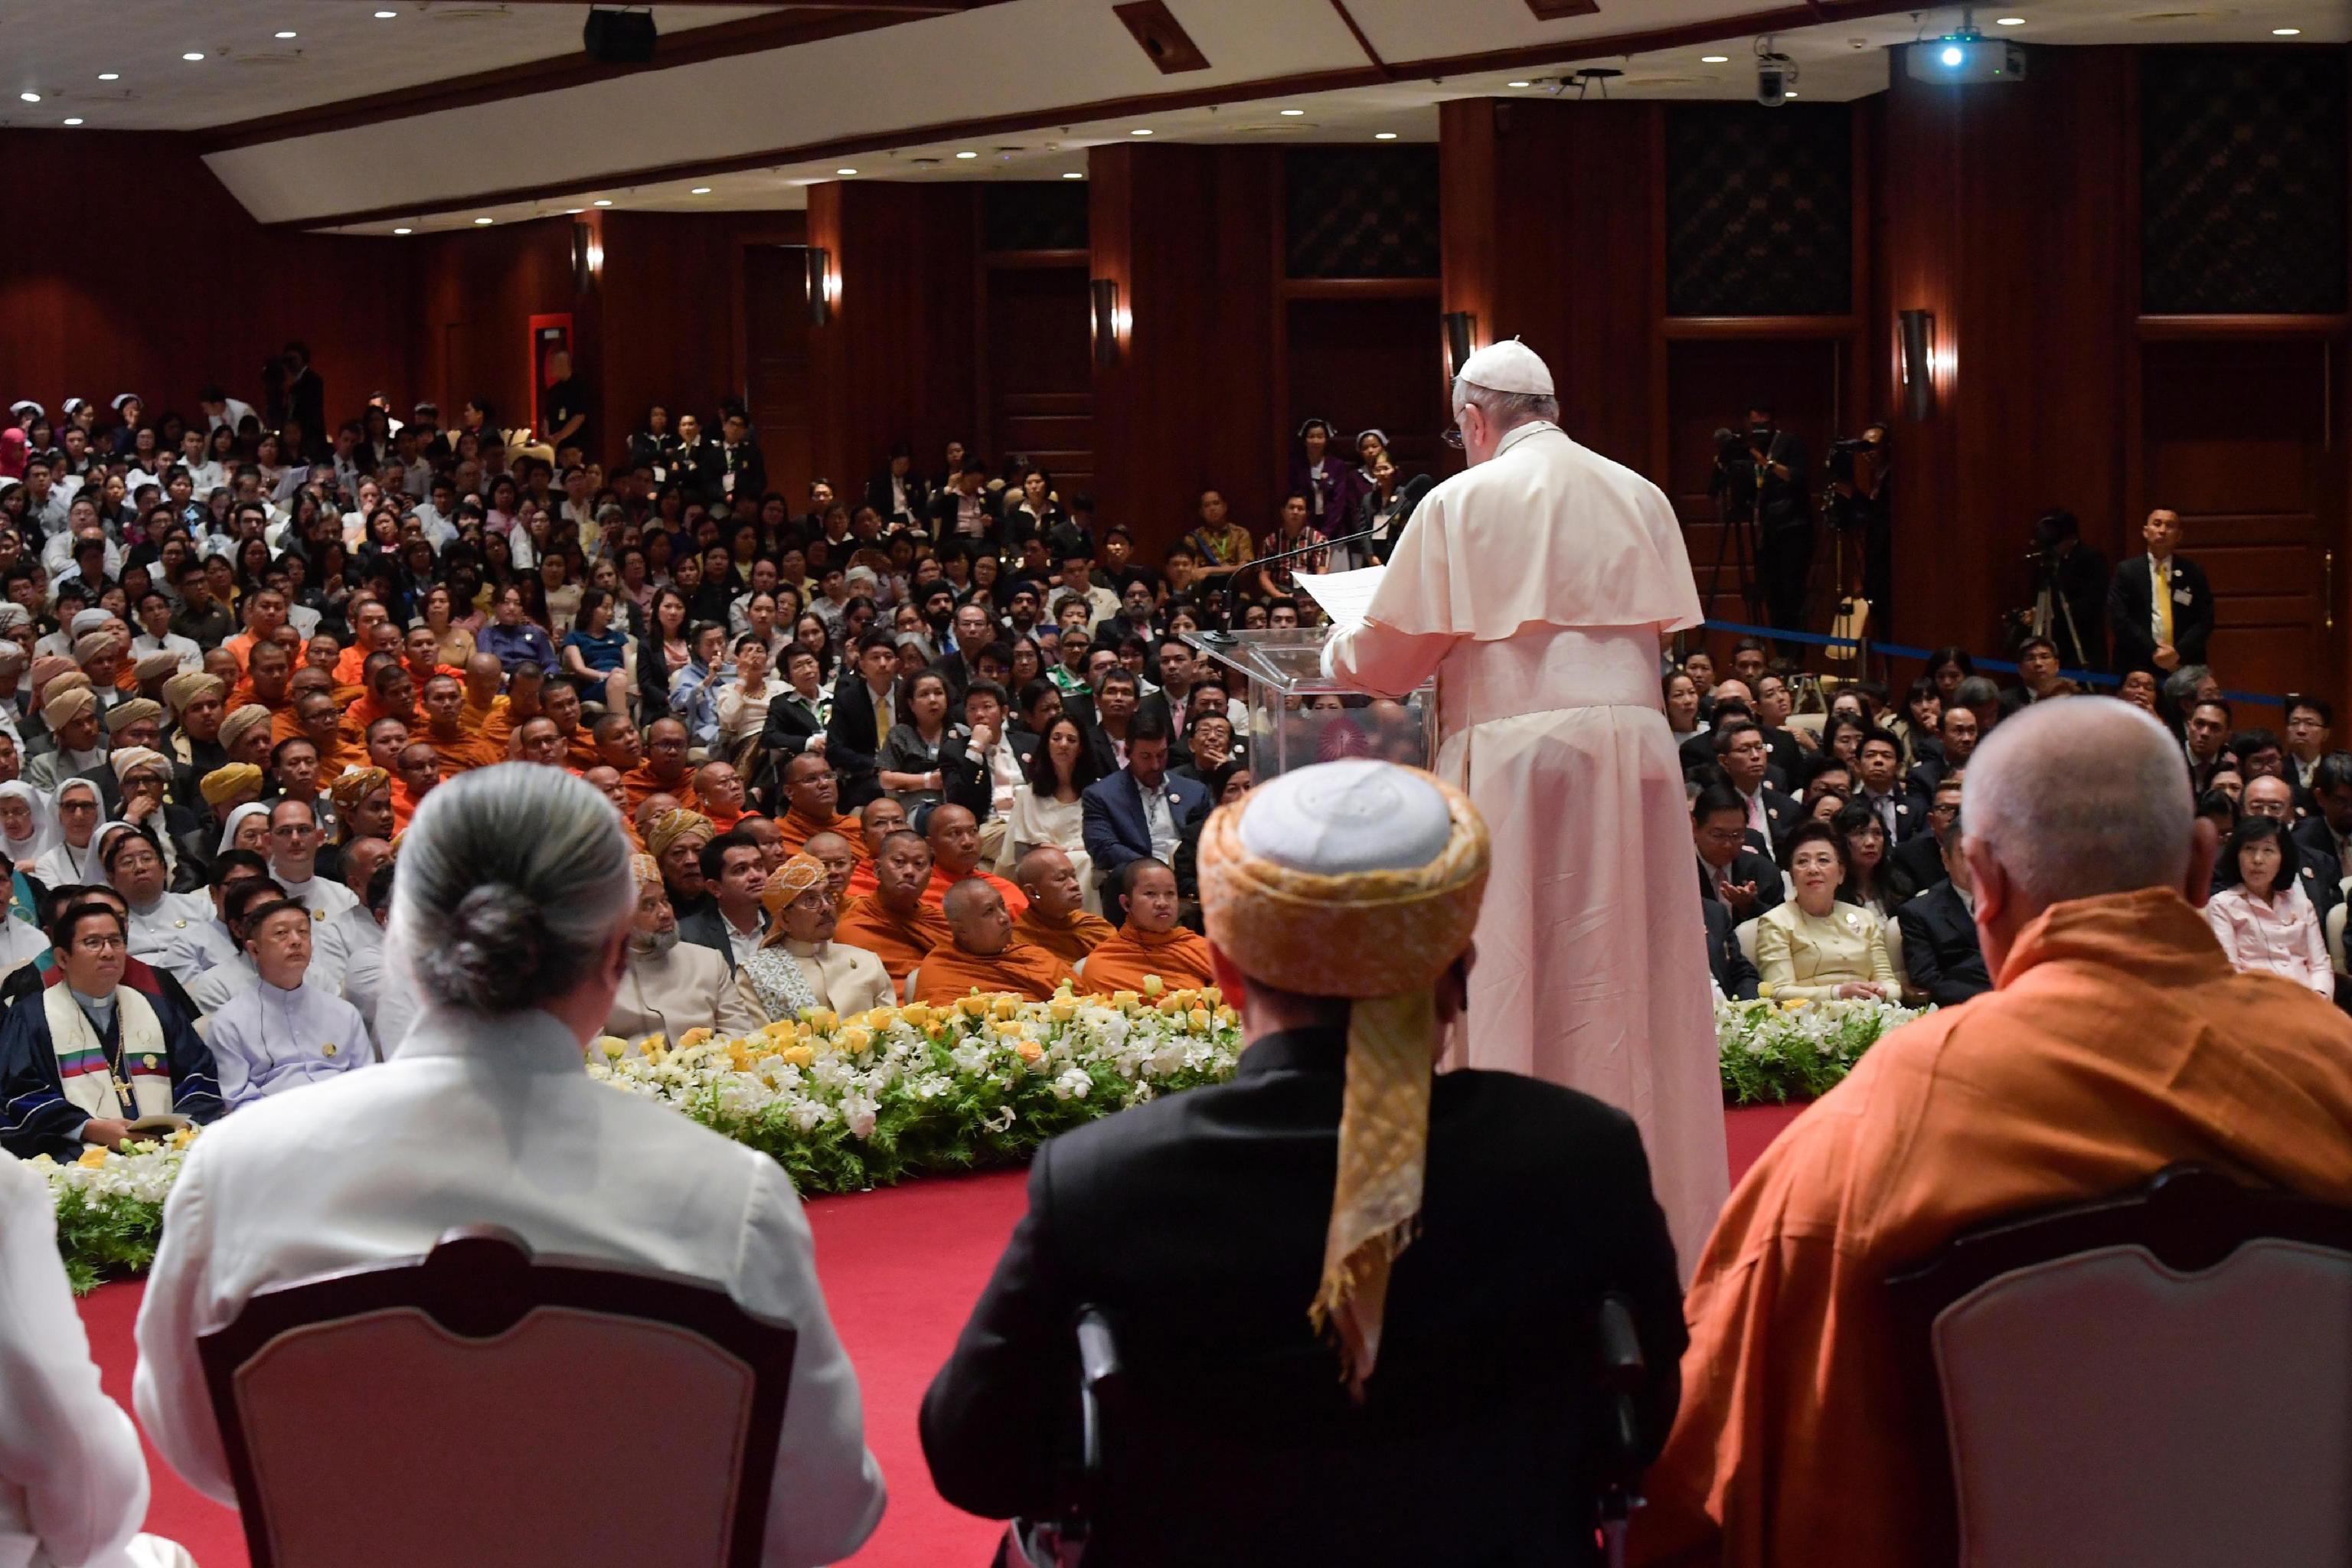 epa08016425 A handout picture provided by the Vatican Media shows Pope Francis (C-R) delivering a sermon during a visit at Chulalongkorn University in Bangkok, Thailand, 22 November 2019. Pope Francis is in Thailand for an apostolic visit on the occasion of the 350th anniversary of the founding of Mission de Siam. Pope Francis is the first pontiff to visit Thailand in nearly four decades after John Paul II in 1984.  EPA/VATICAN MEDIA HANDOUT  HANDOUT EDITORIAL USE ONLY/NO SALES